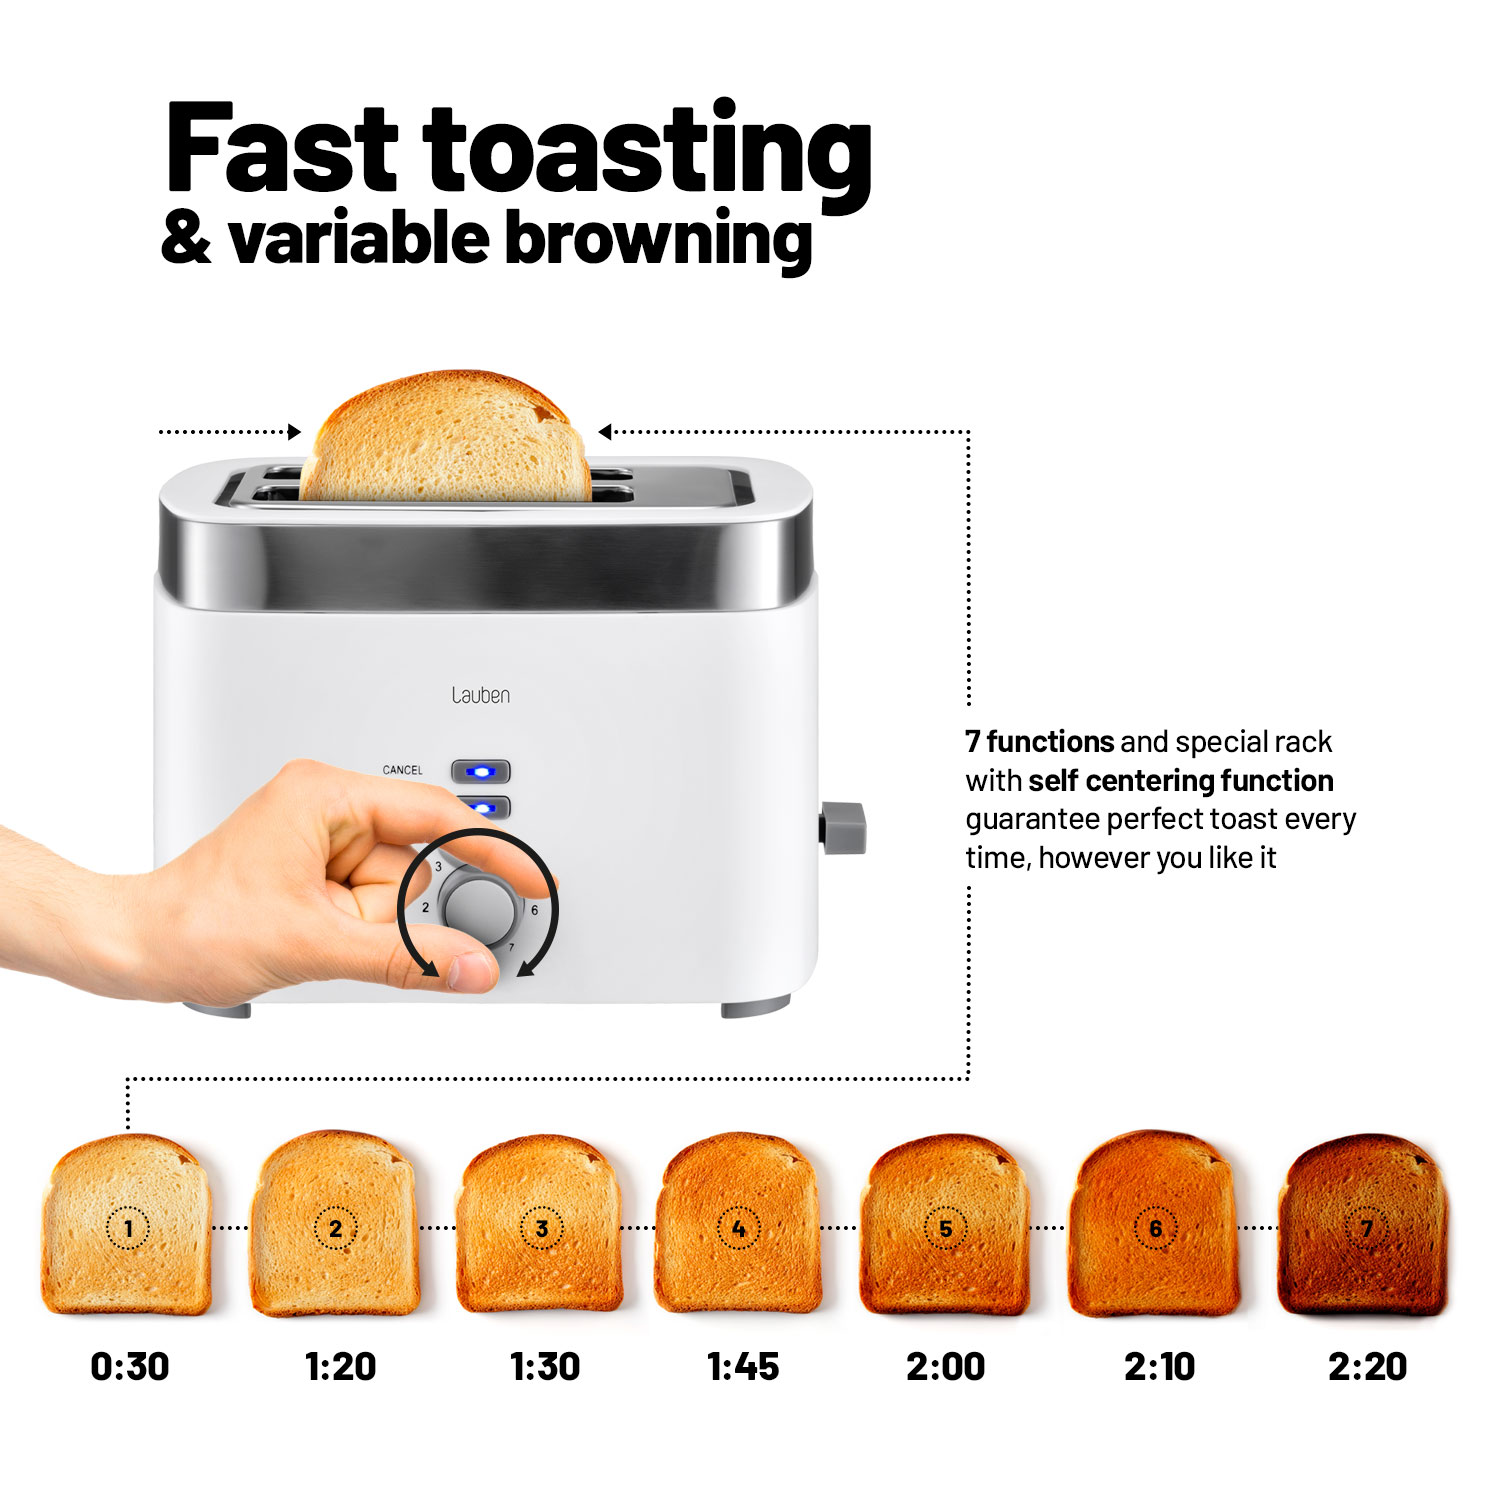 Lauben Toaster T17WS - fast toasting & variable browning